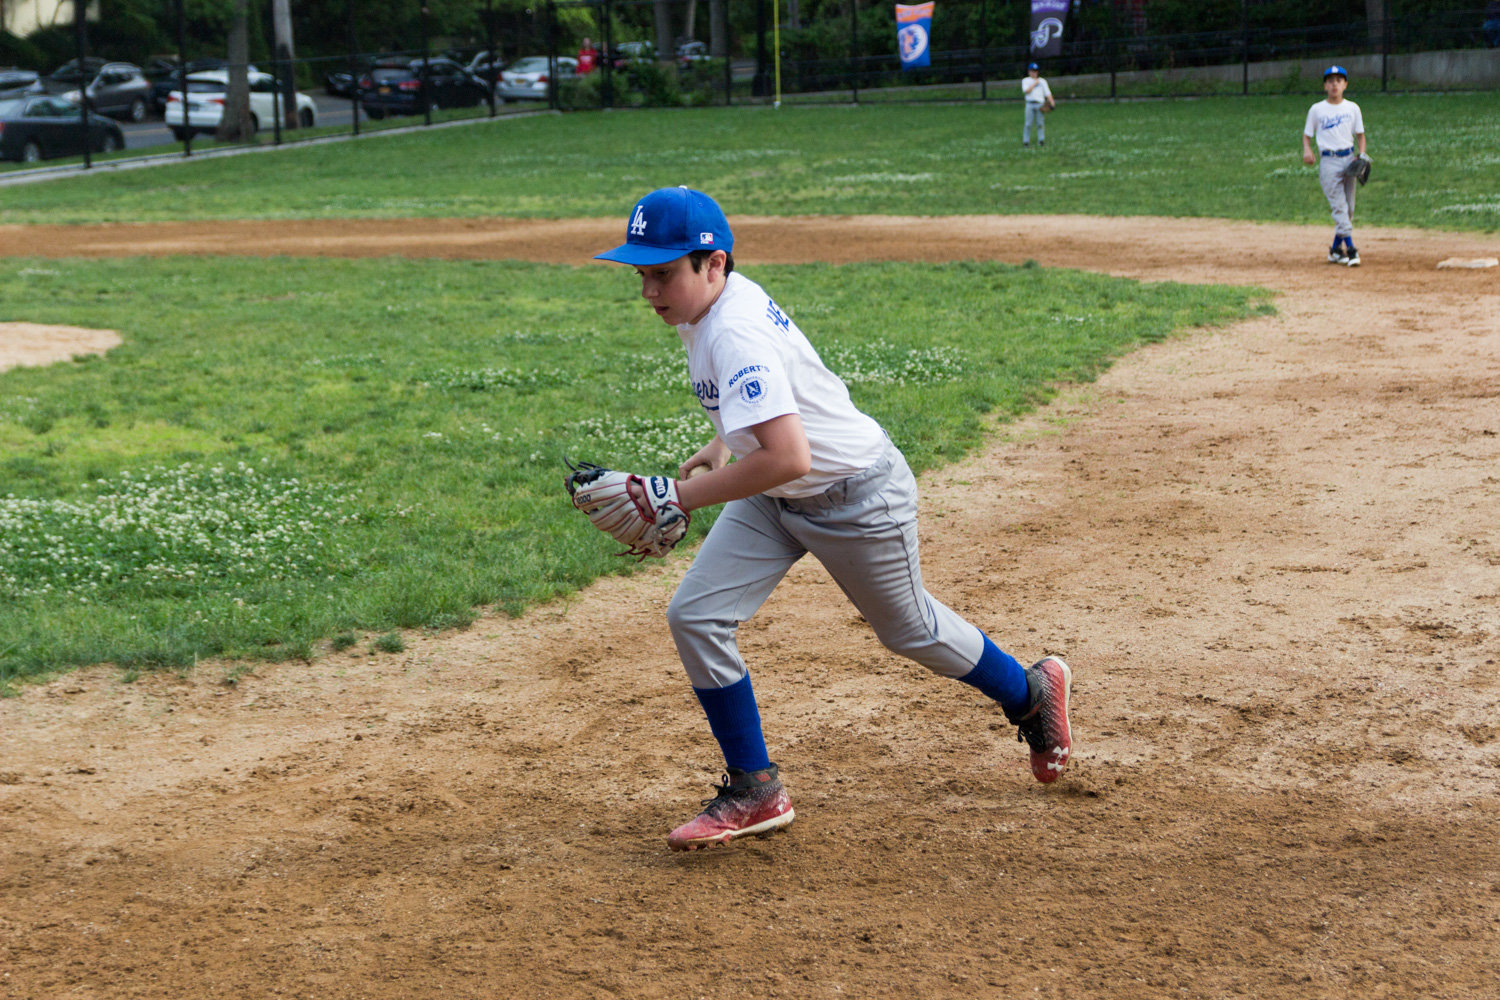 North Riverdale Baseball League, whose home base is Sid Augarten Field, hopes the School Construction Authority will wait to begin work on P.S. 81’s roof until after their season is over. Otherwise, the installation of retention tanks at the field could make using the fields for America’s favorite pastime difficult, if not impossible.